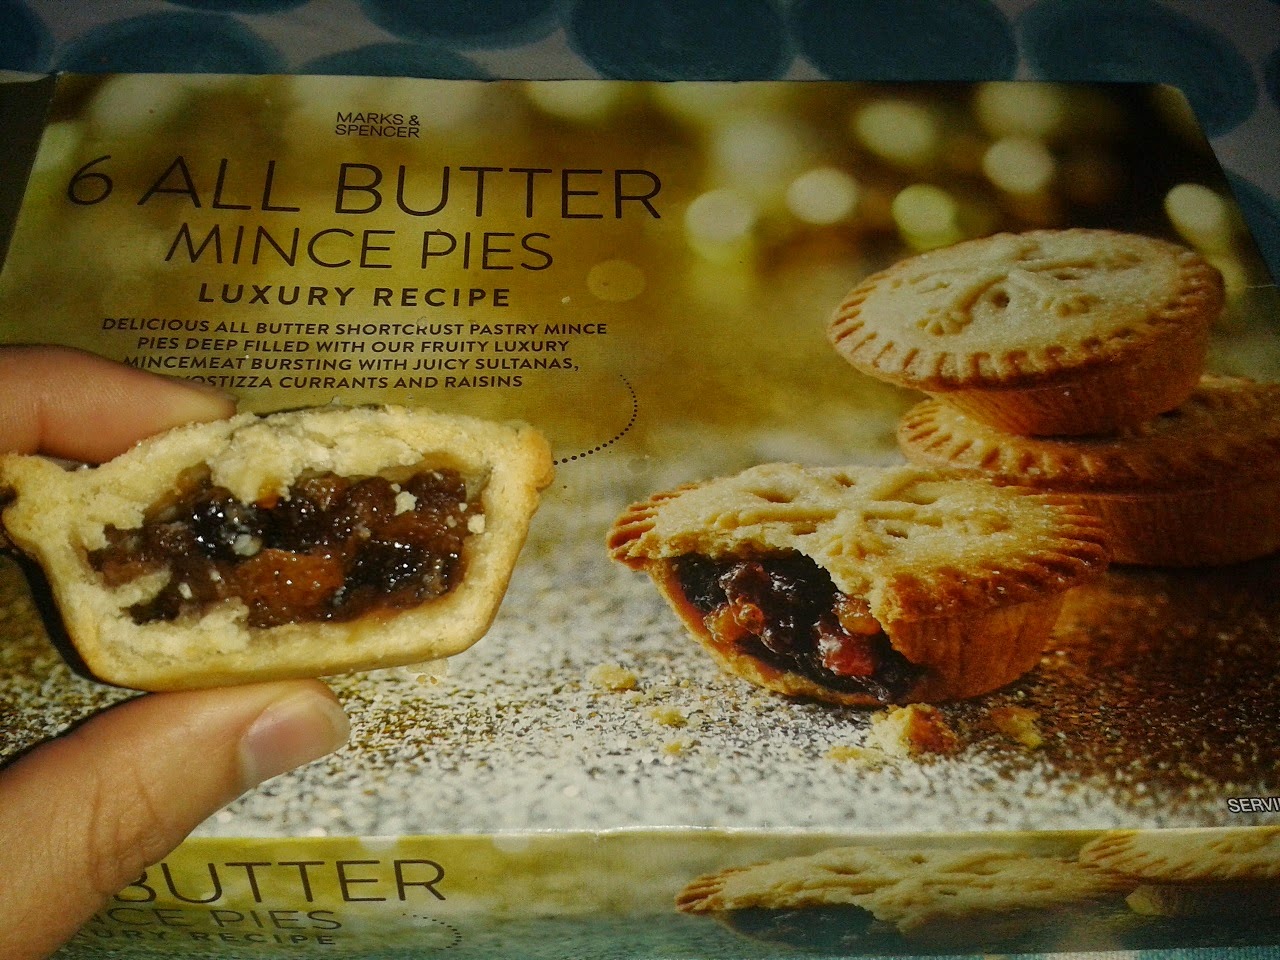 Marks and Spencer All Butter Luxury Mince Pies Review